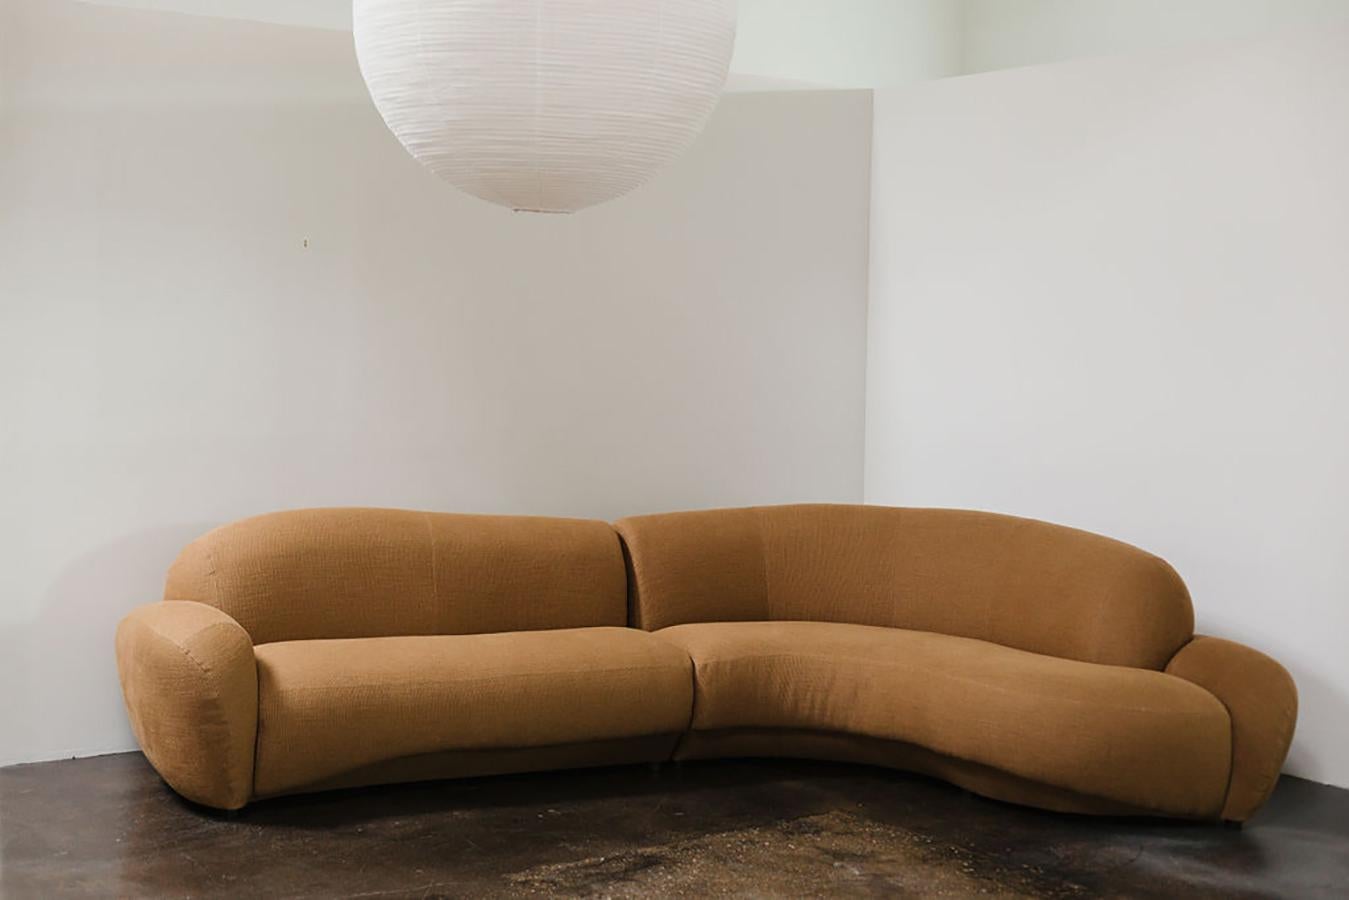 Crafted with meticulous attention to detail, this Postmodern Preview Sectional Sectional showcases an exquisite combination of form and function. Its low-profile design creates an inviting and relaxed seating experience. True to Kagan's design